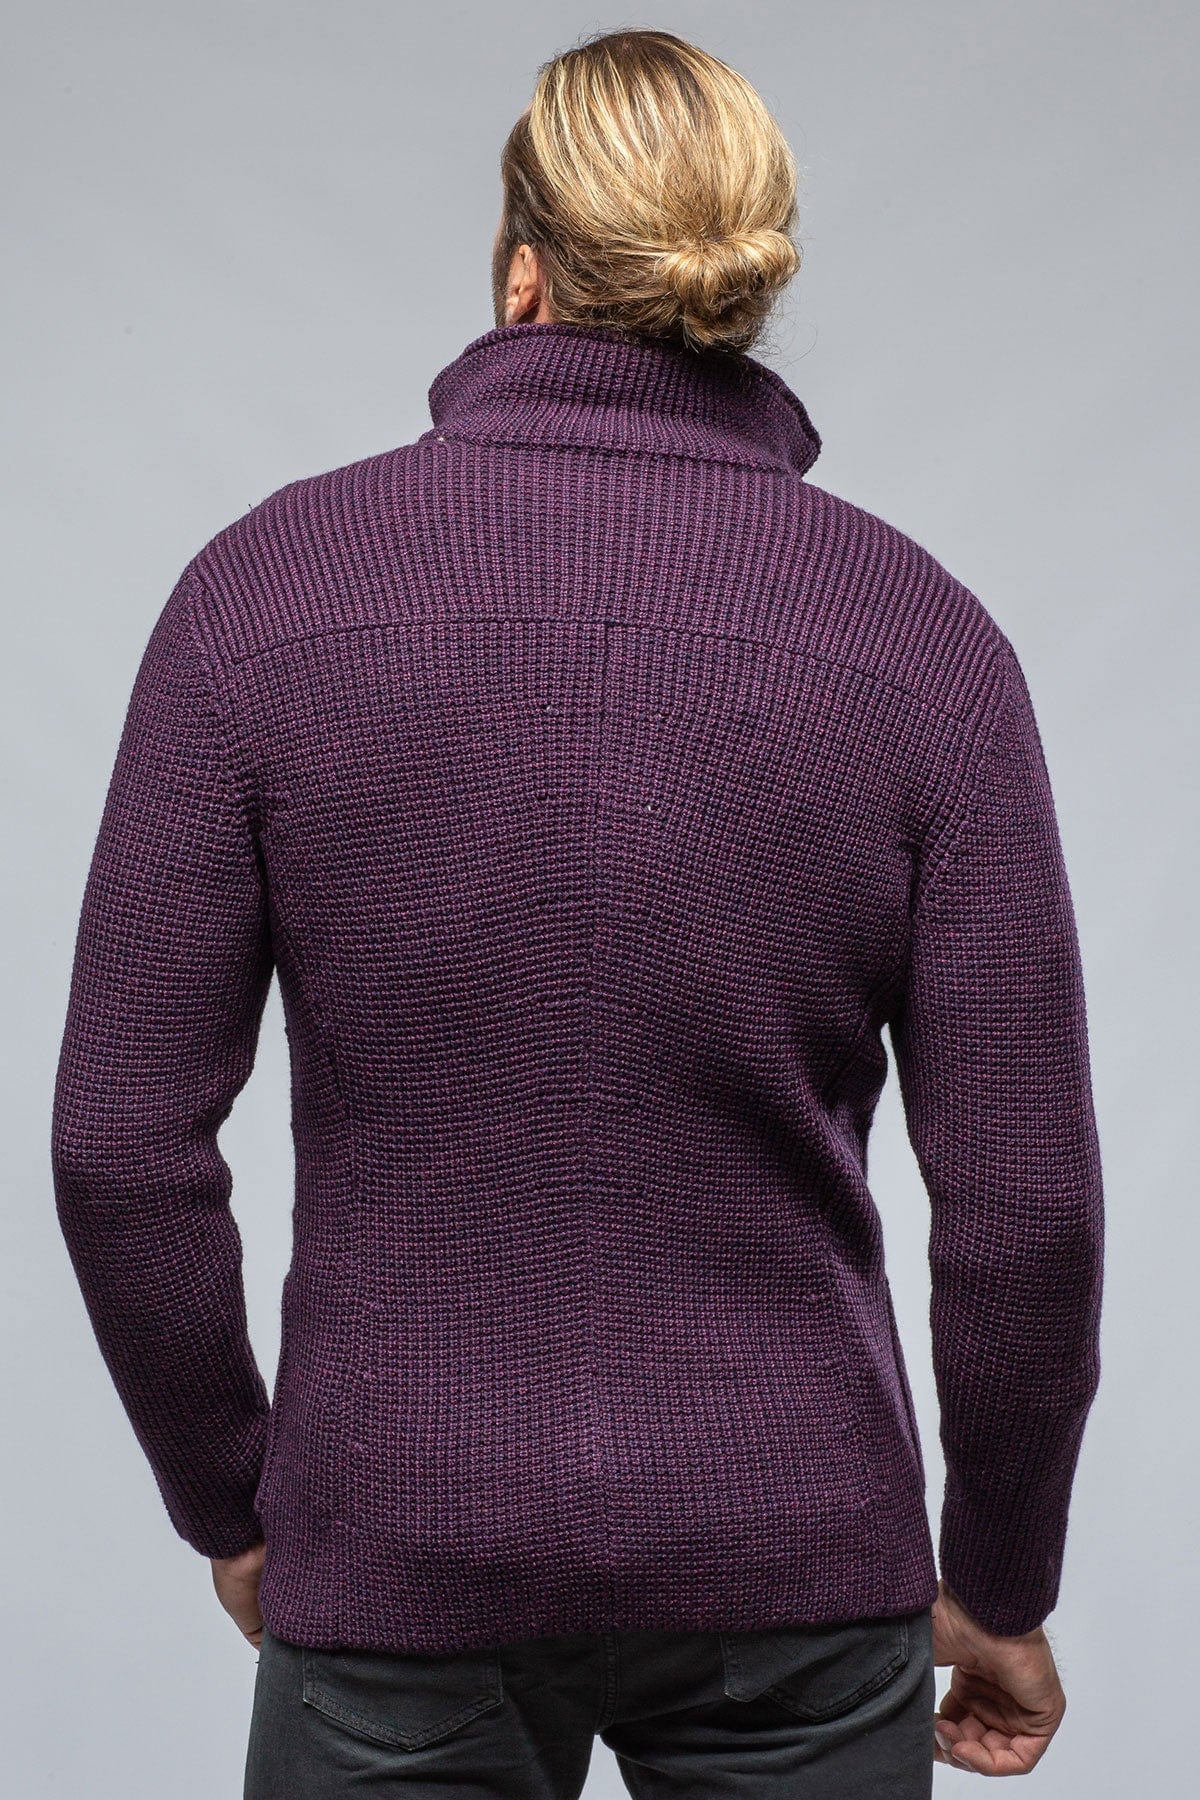 Tuscan Sweater Jacket In Wine - AXEL'S